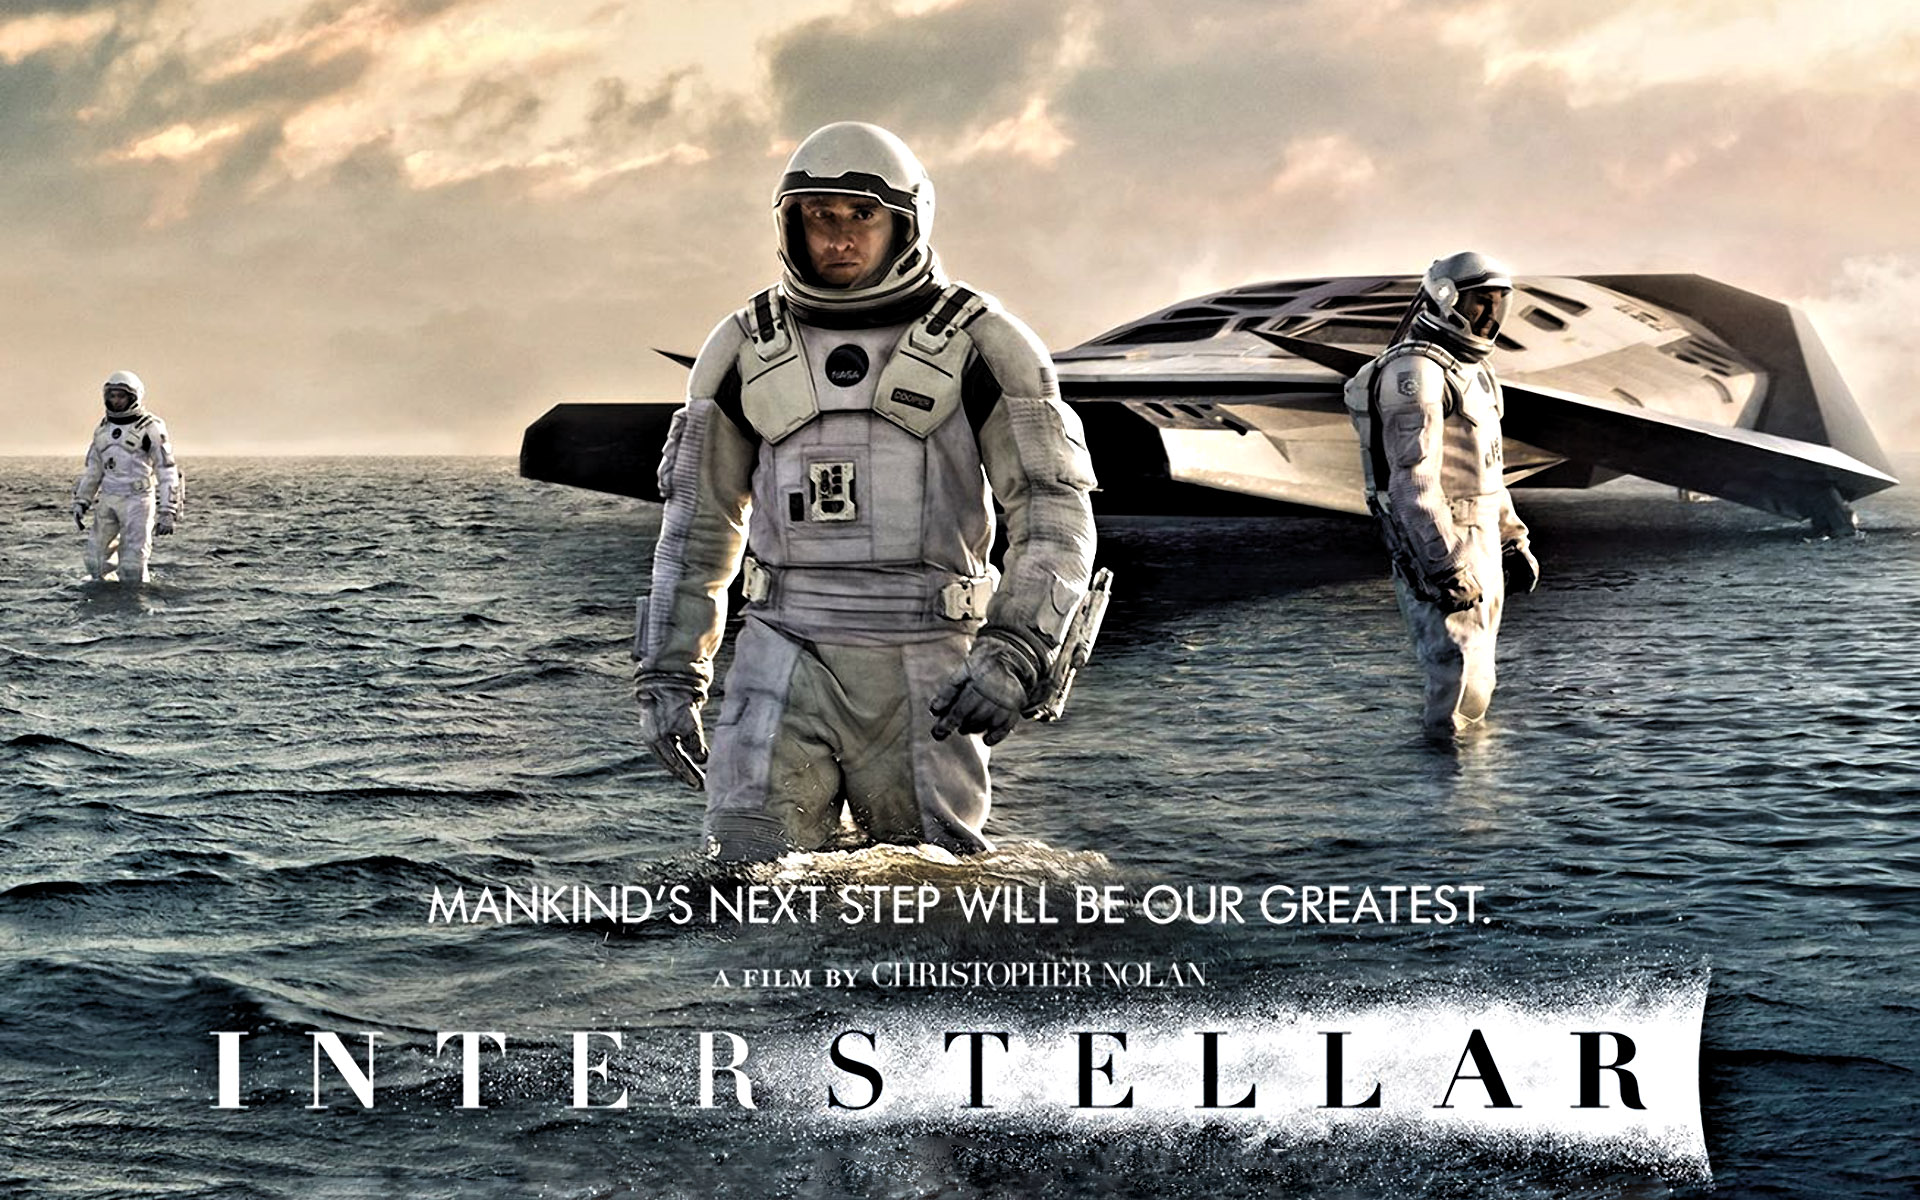 interstellar-imax-poster-wallpaper-these-awesome-fan-made-interstellar-posters-are-best-seen-after-the-film